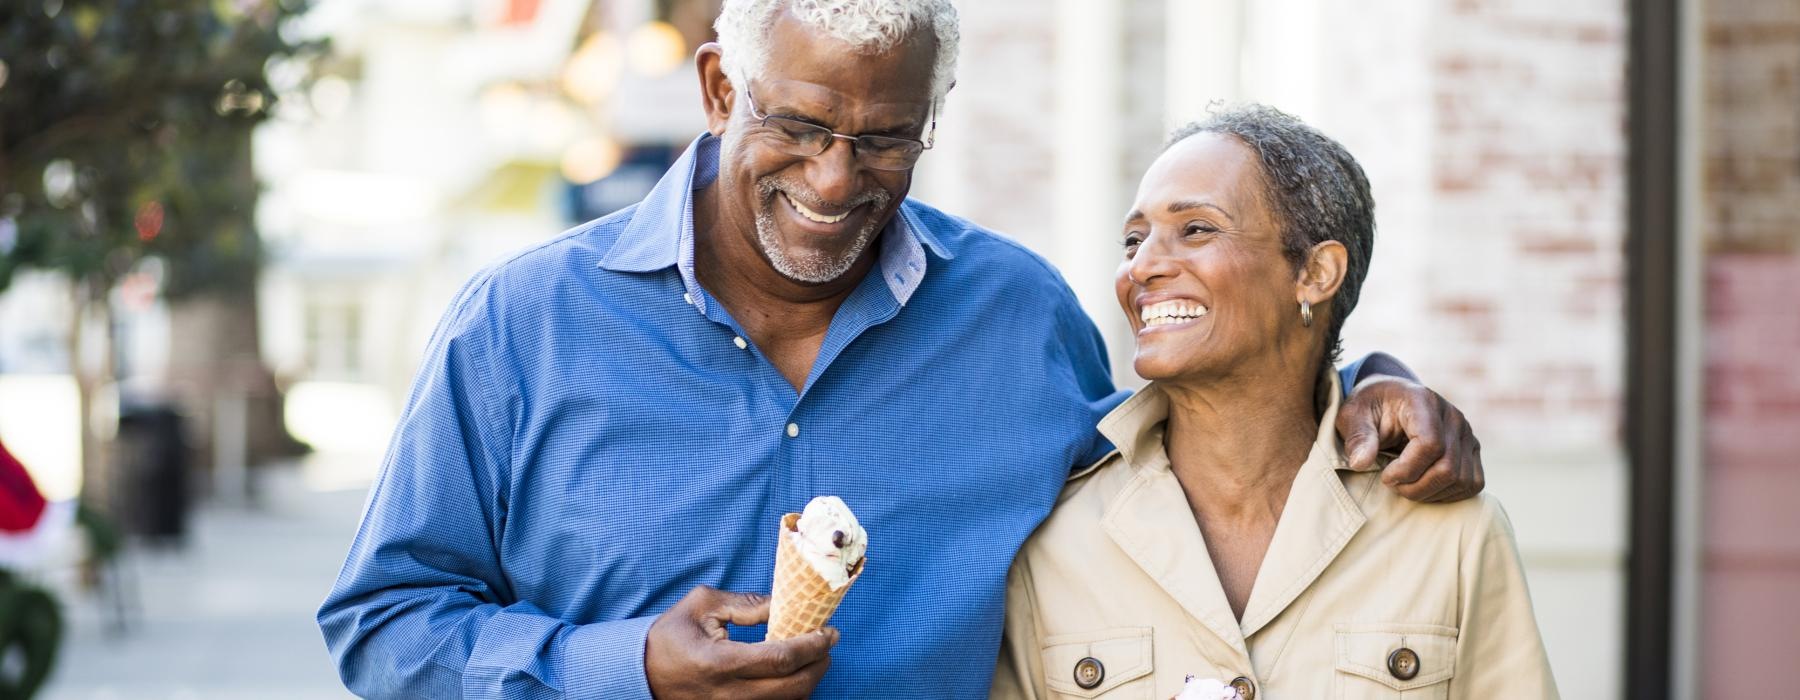 a man and woman holding ice cream cones